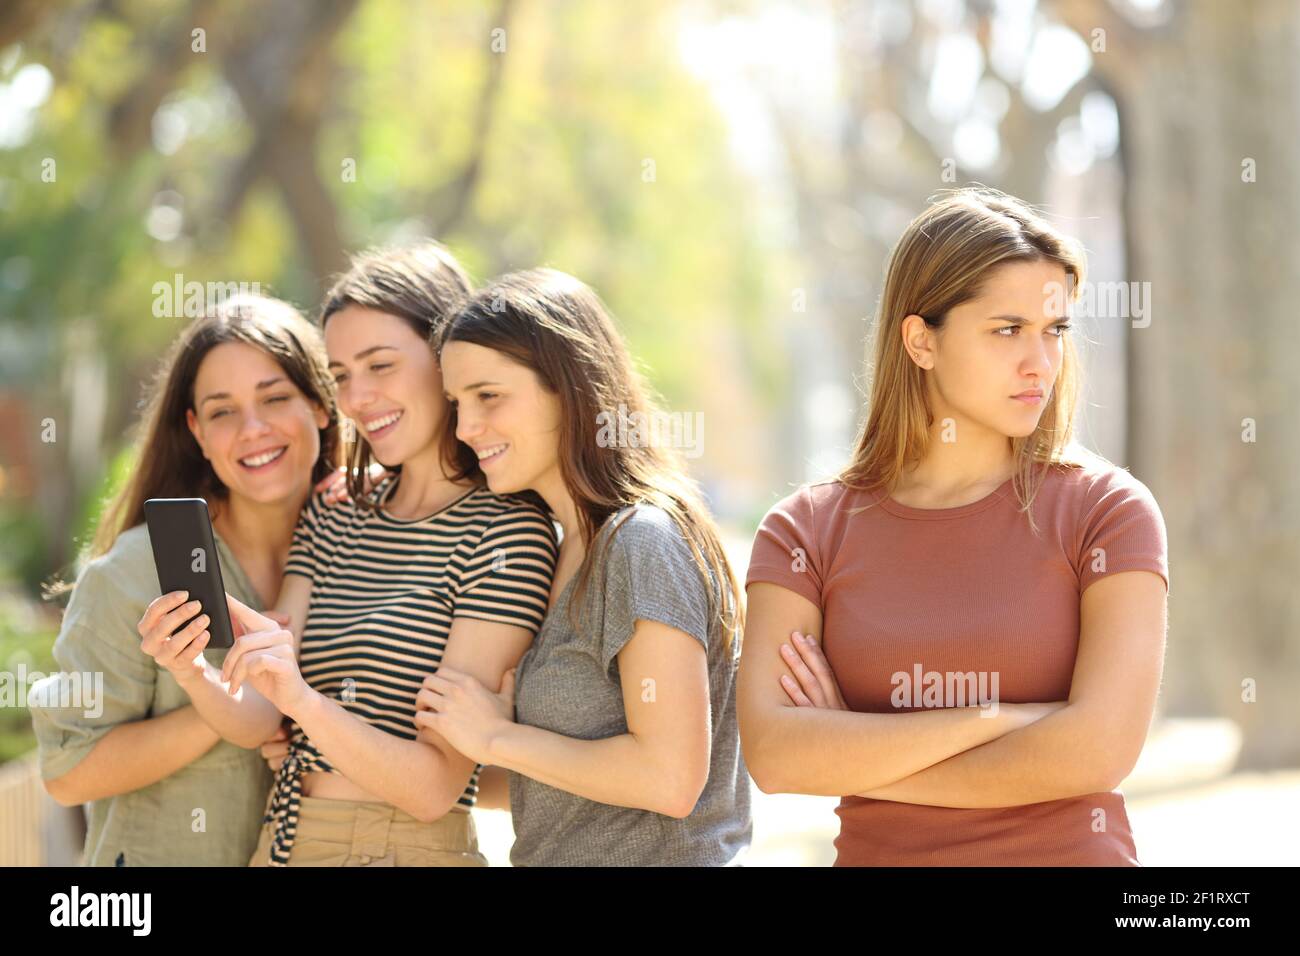 Angry woman being ignored by her happy friends who are checking smart phone content in the street Stock Photo